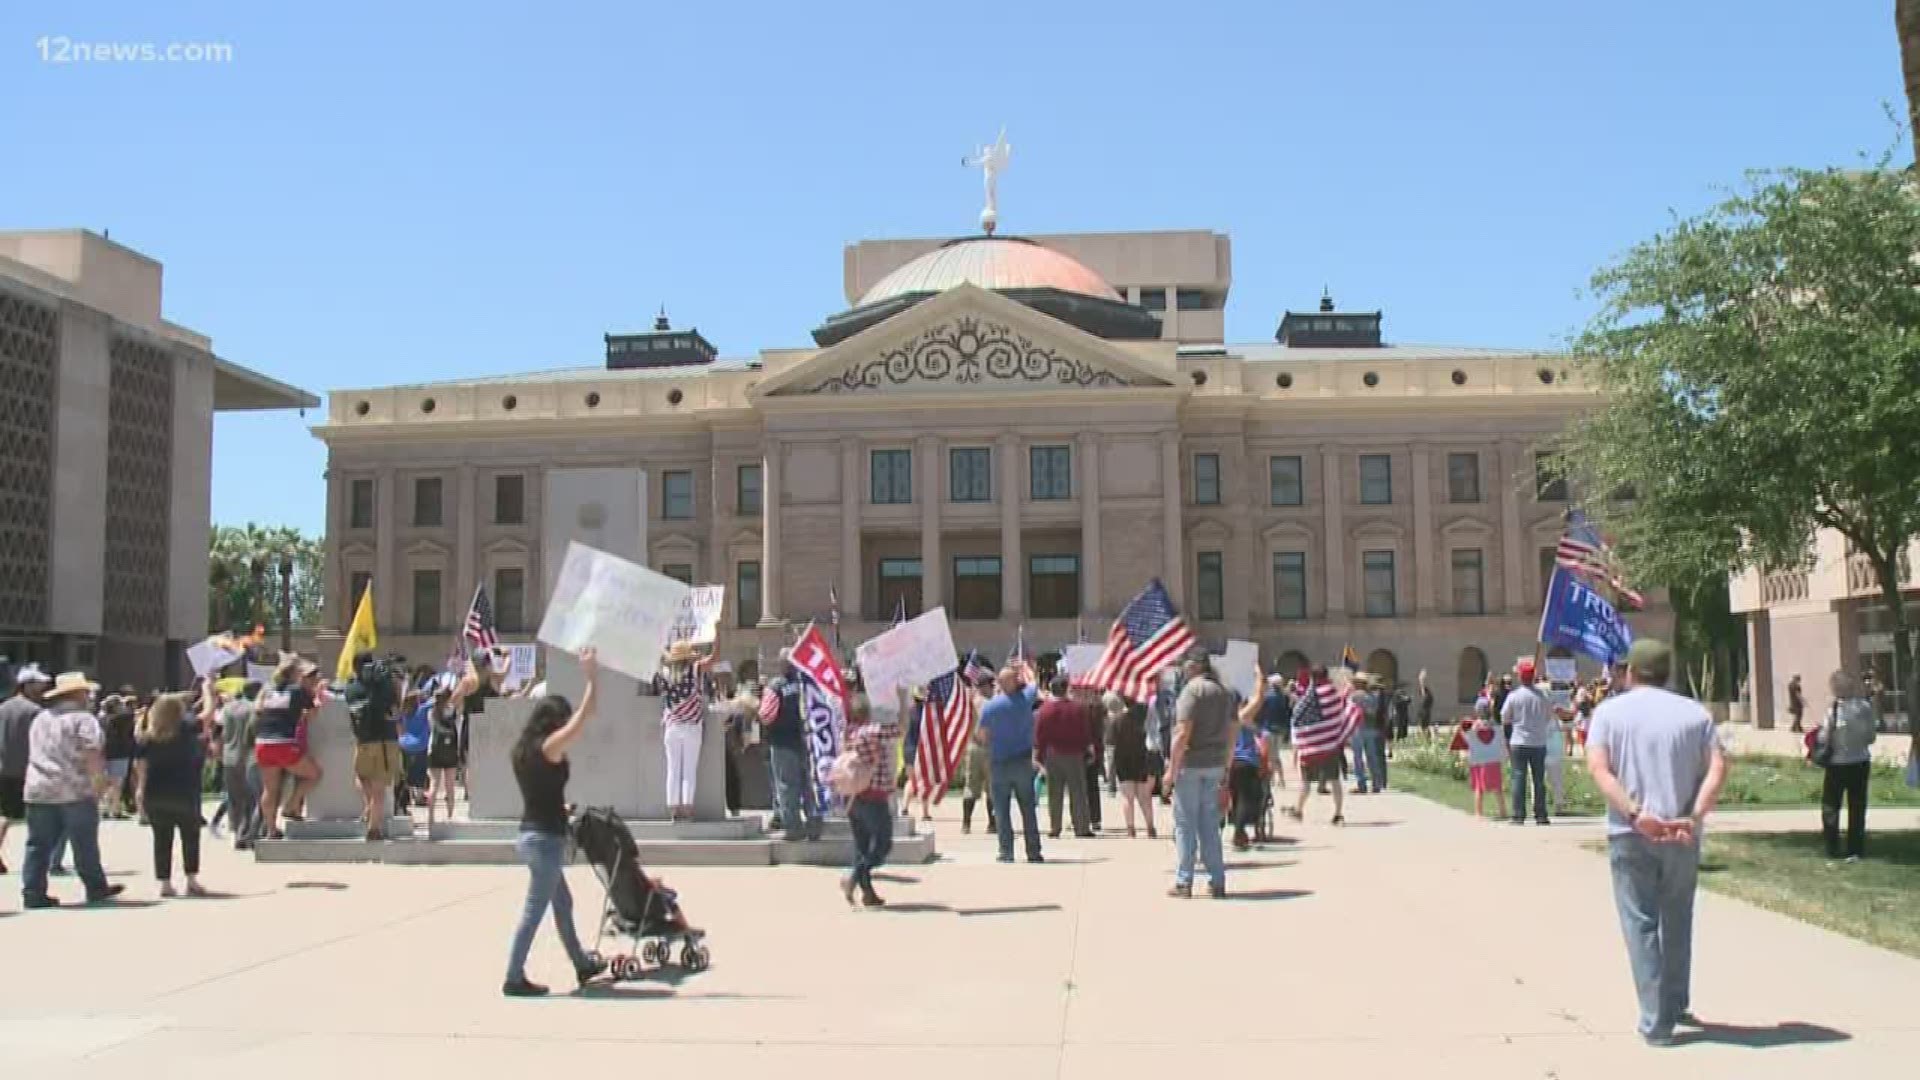 There were no more reported deaths of coronavirus in Maricopa County since Sunday, but the risk didn't stop protesters. People gathered at the capitol to reopen AZ.